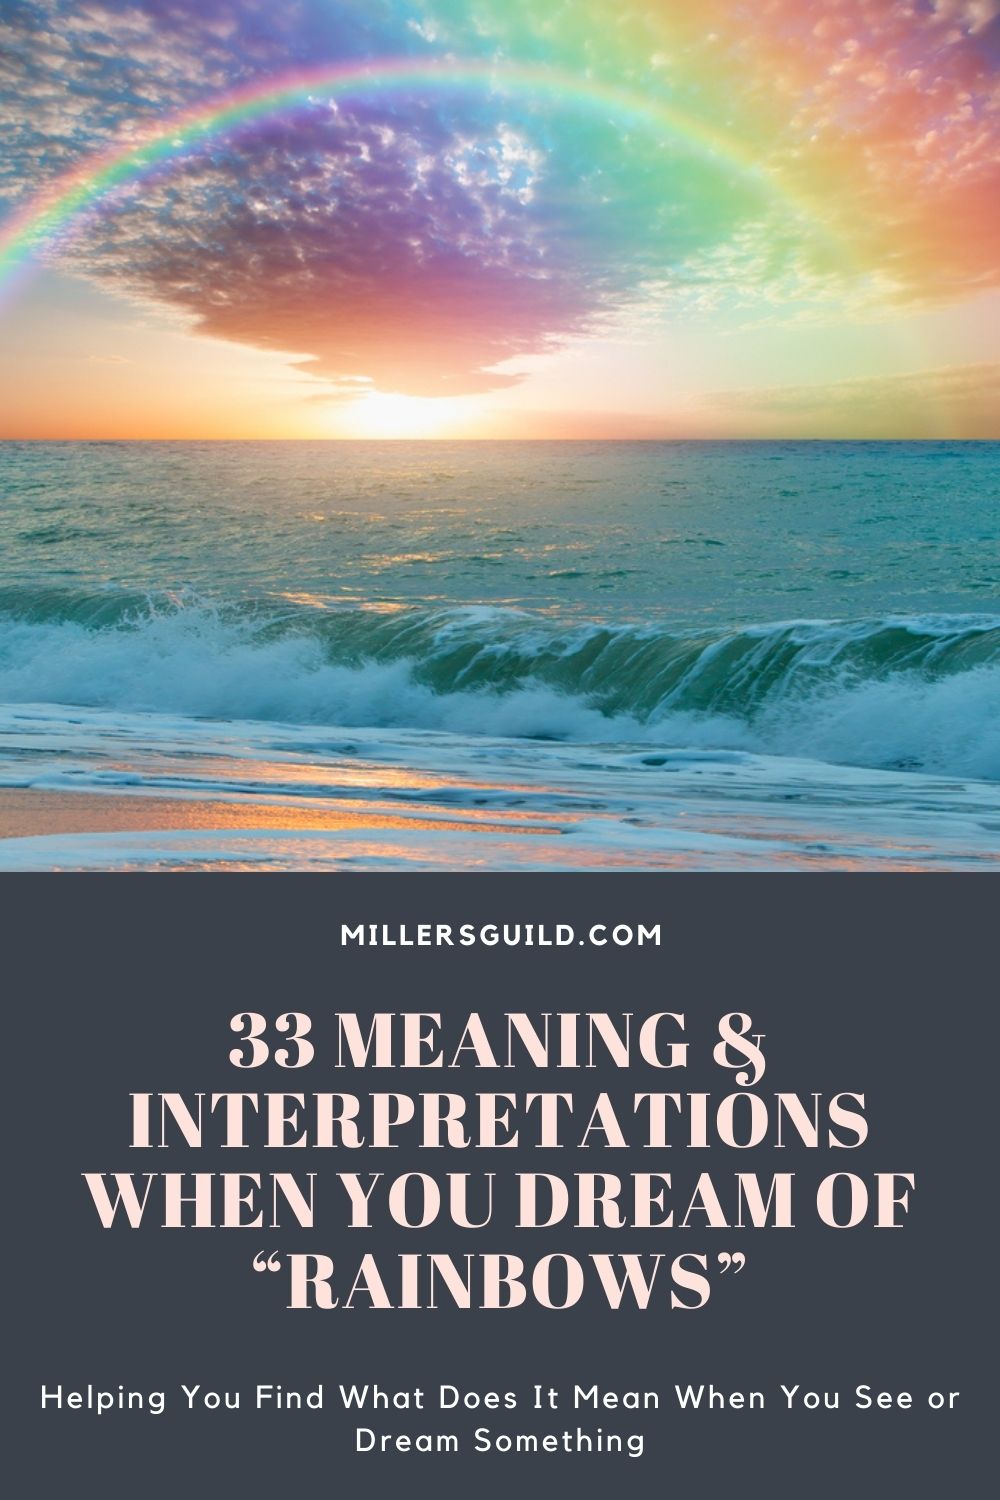 33 Meaning & Interpretations When You Dream Of “Rainbows” 1